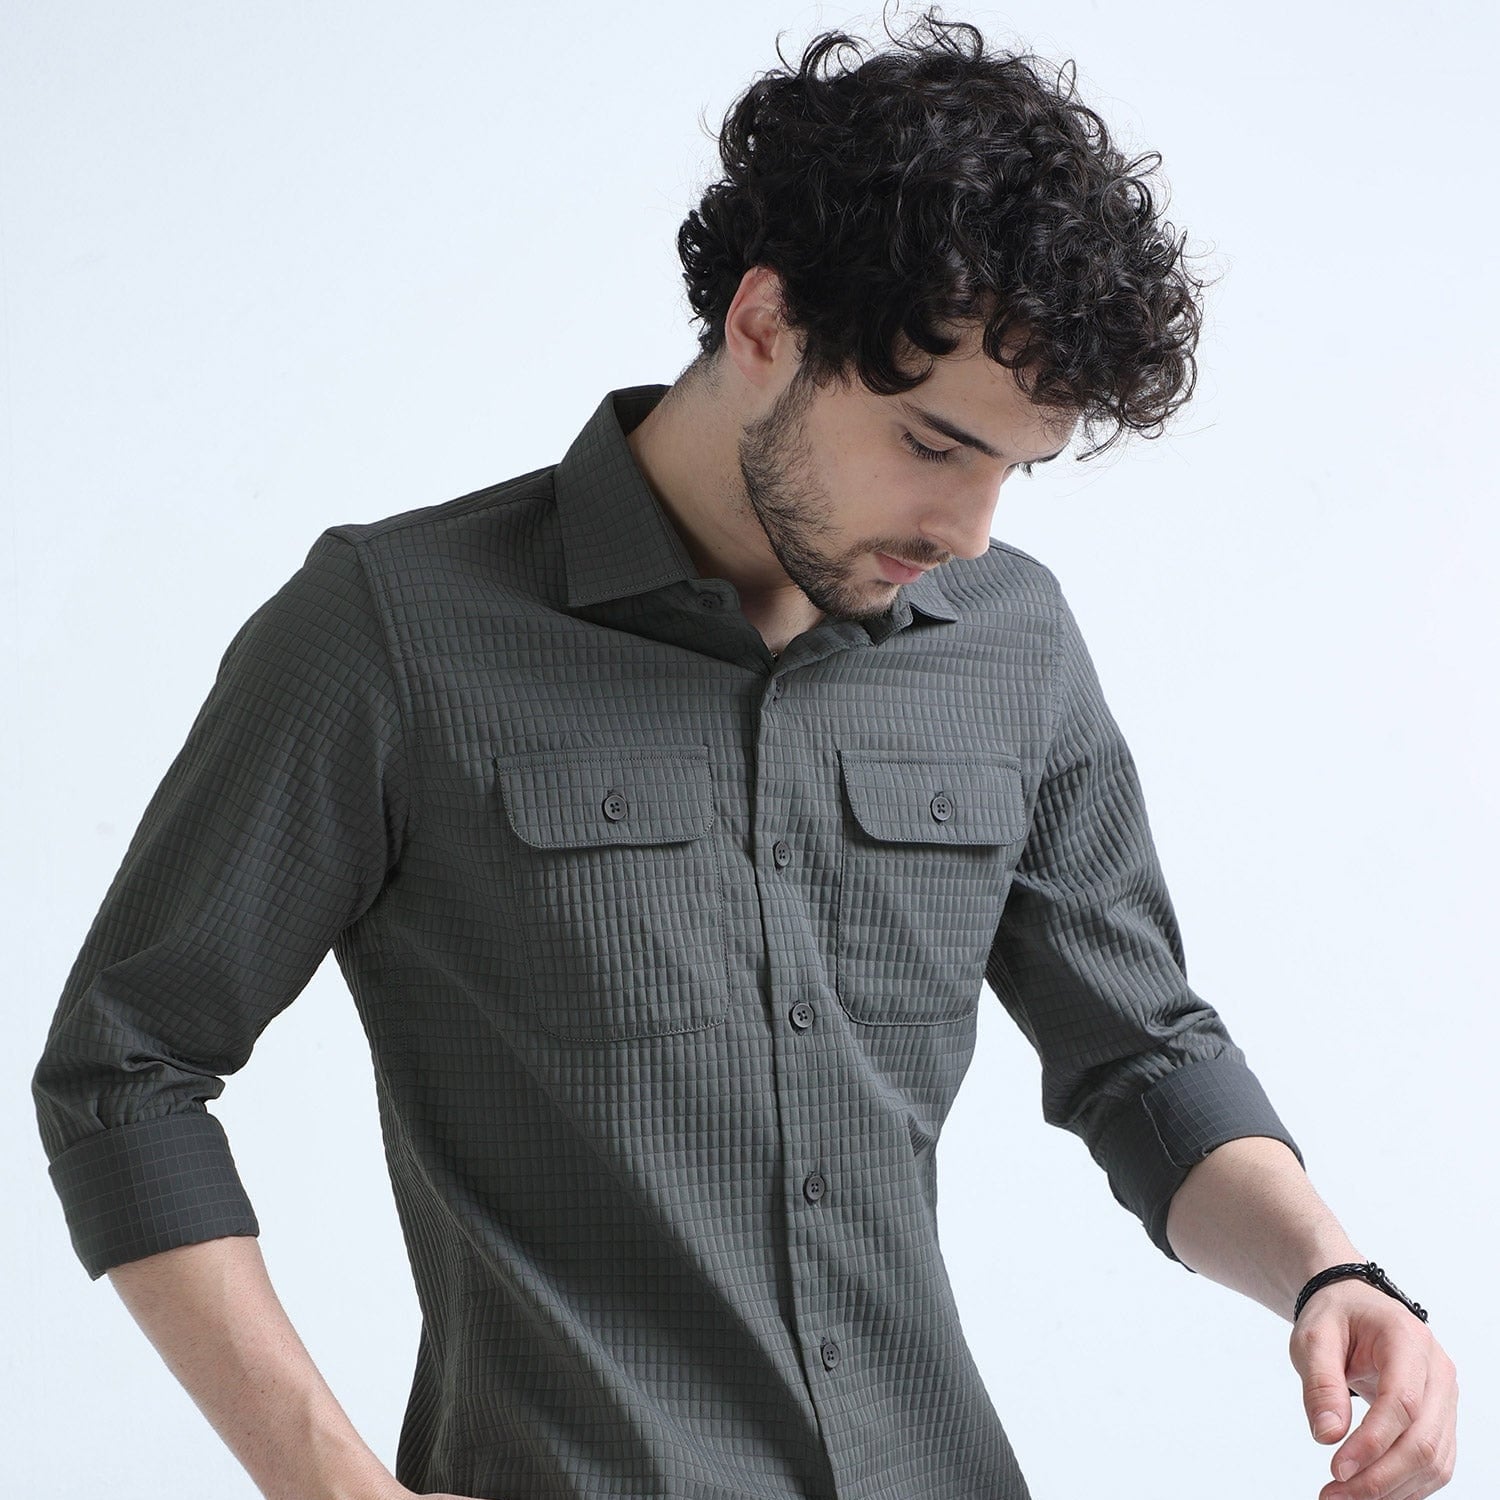 Buy Latest Solid Plain Grey Shirt For Men OnlineRs. 1349.00